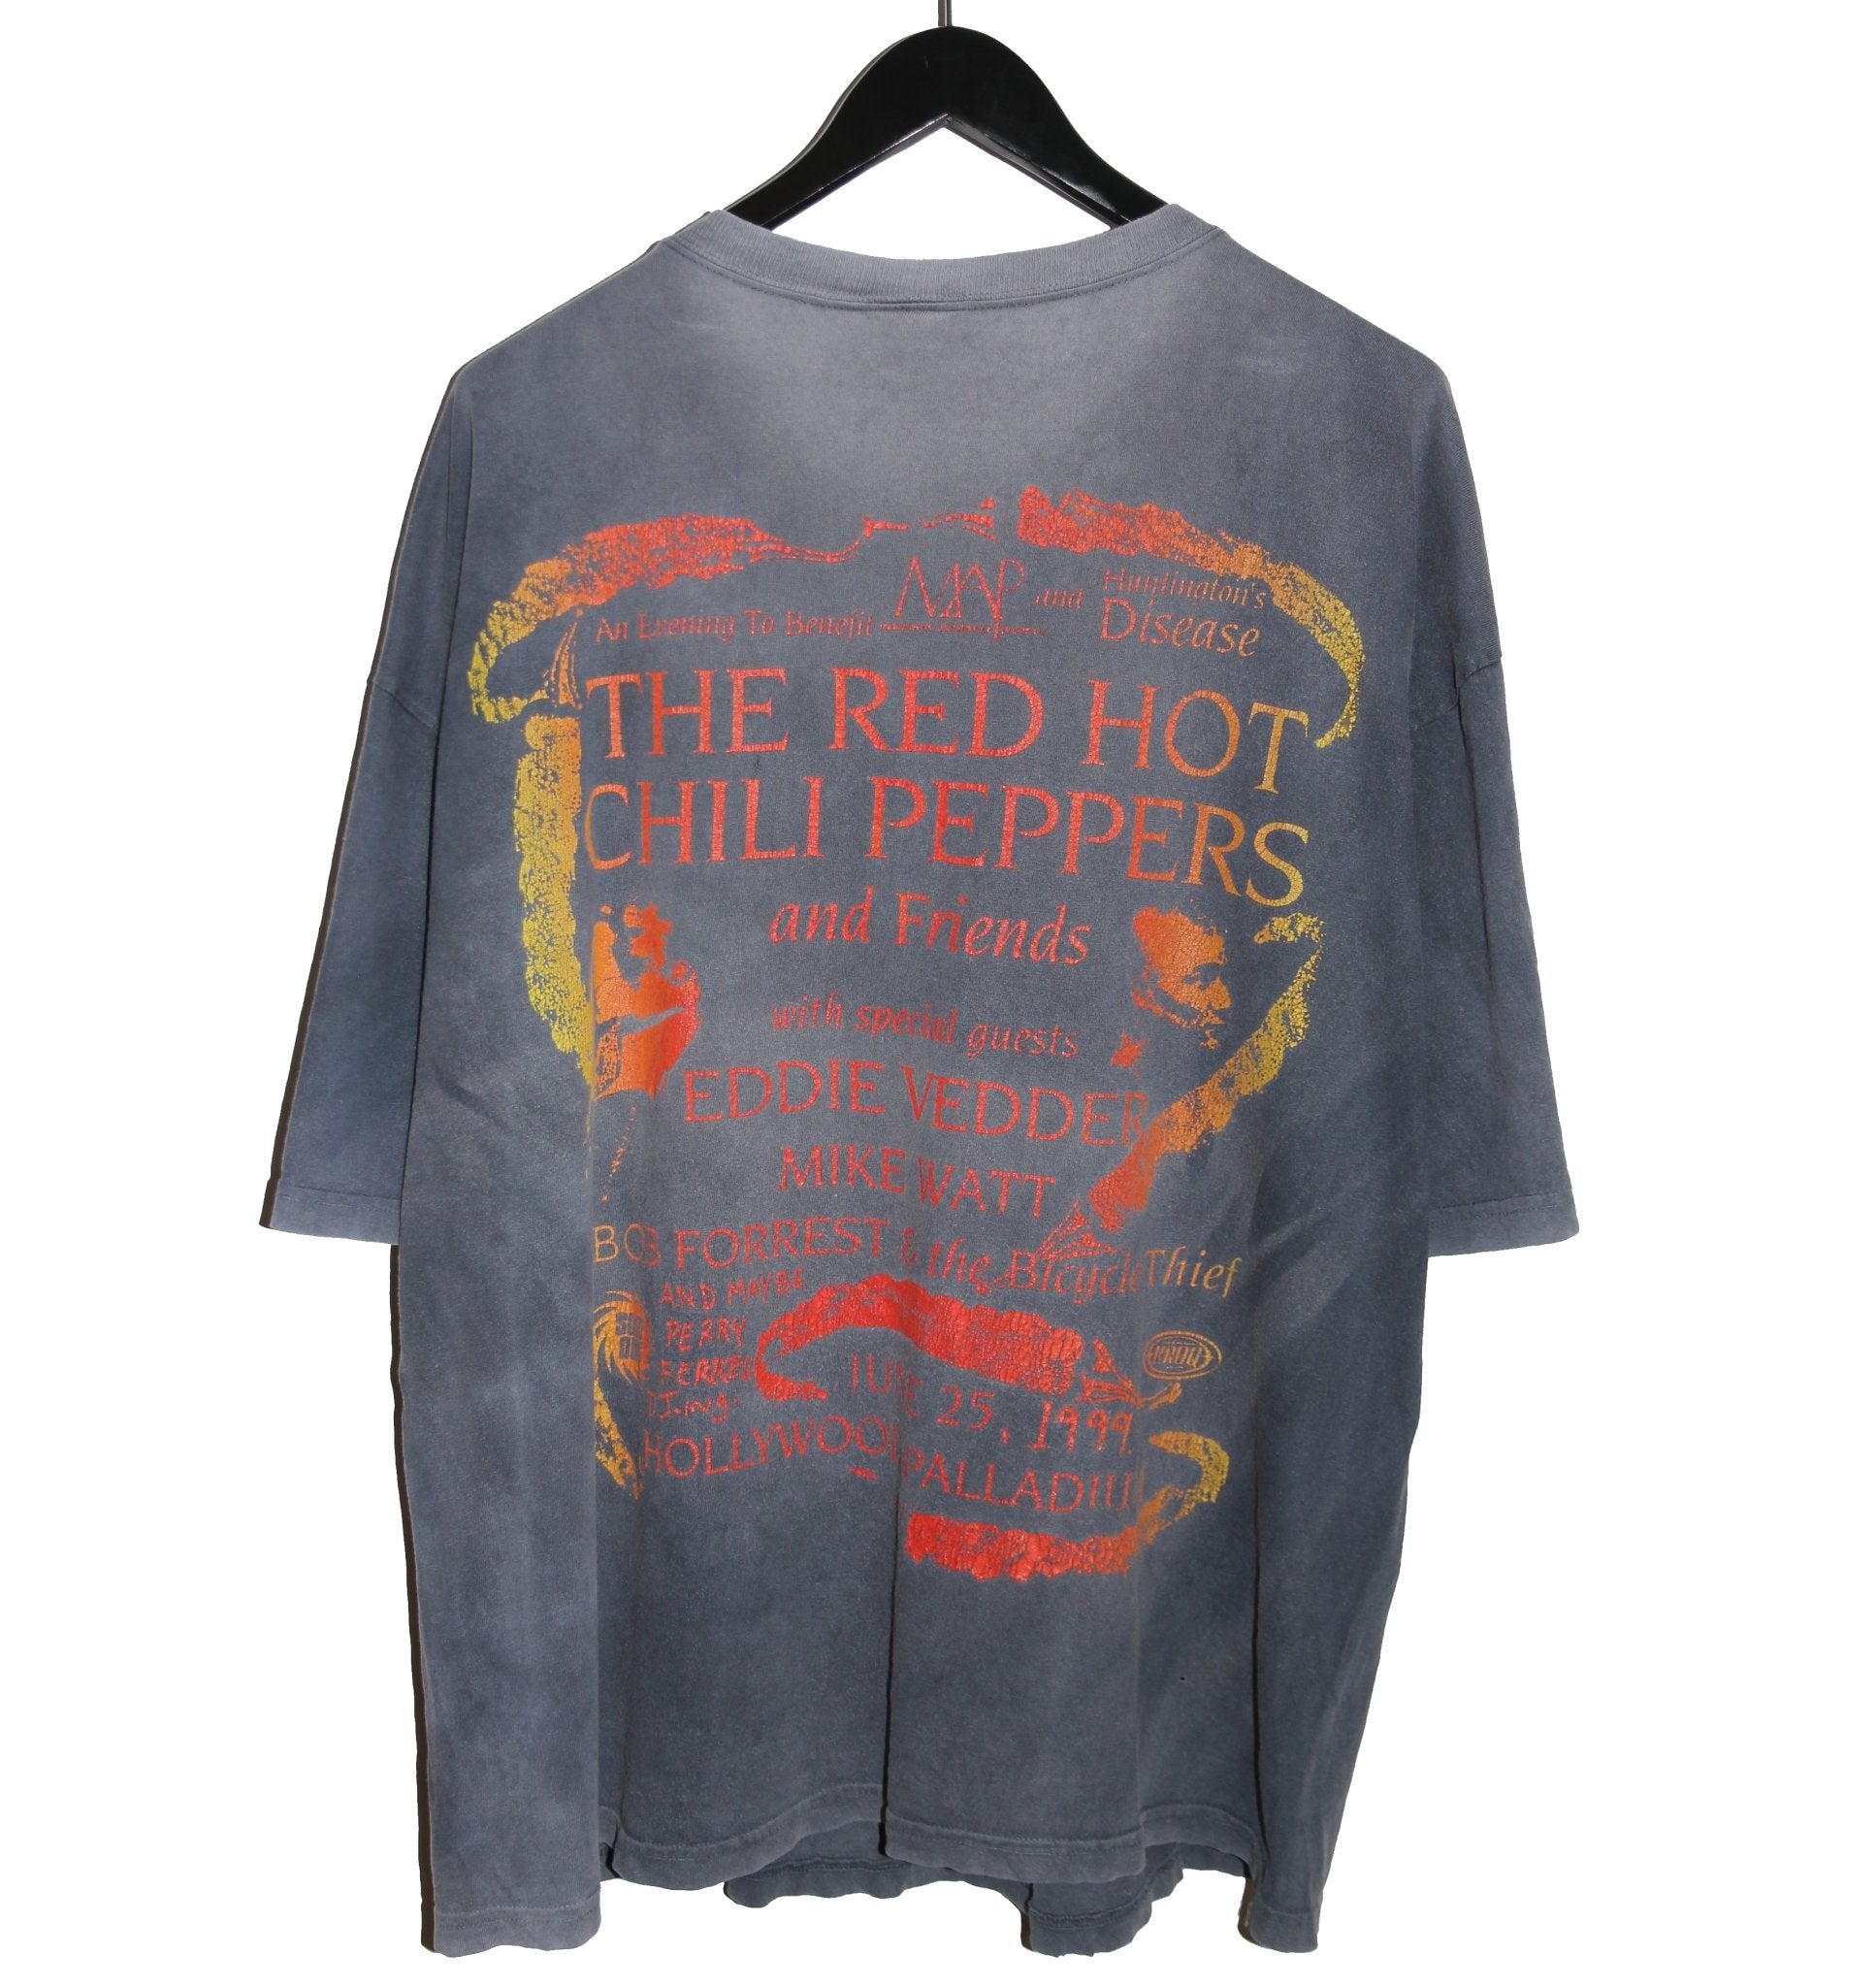 Red Hot Chili Peppers 1999 Hollywood Palladium Show Shirt - Faded AU